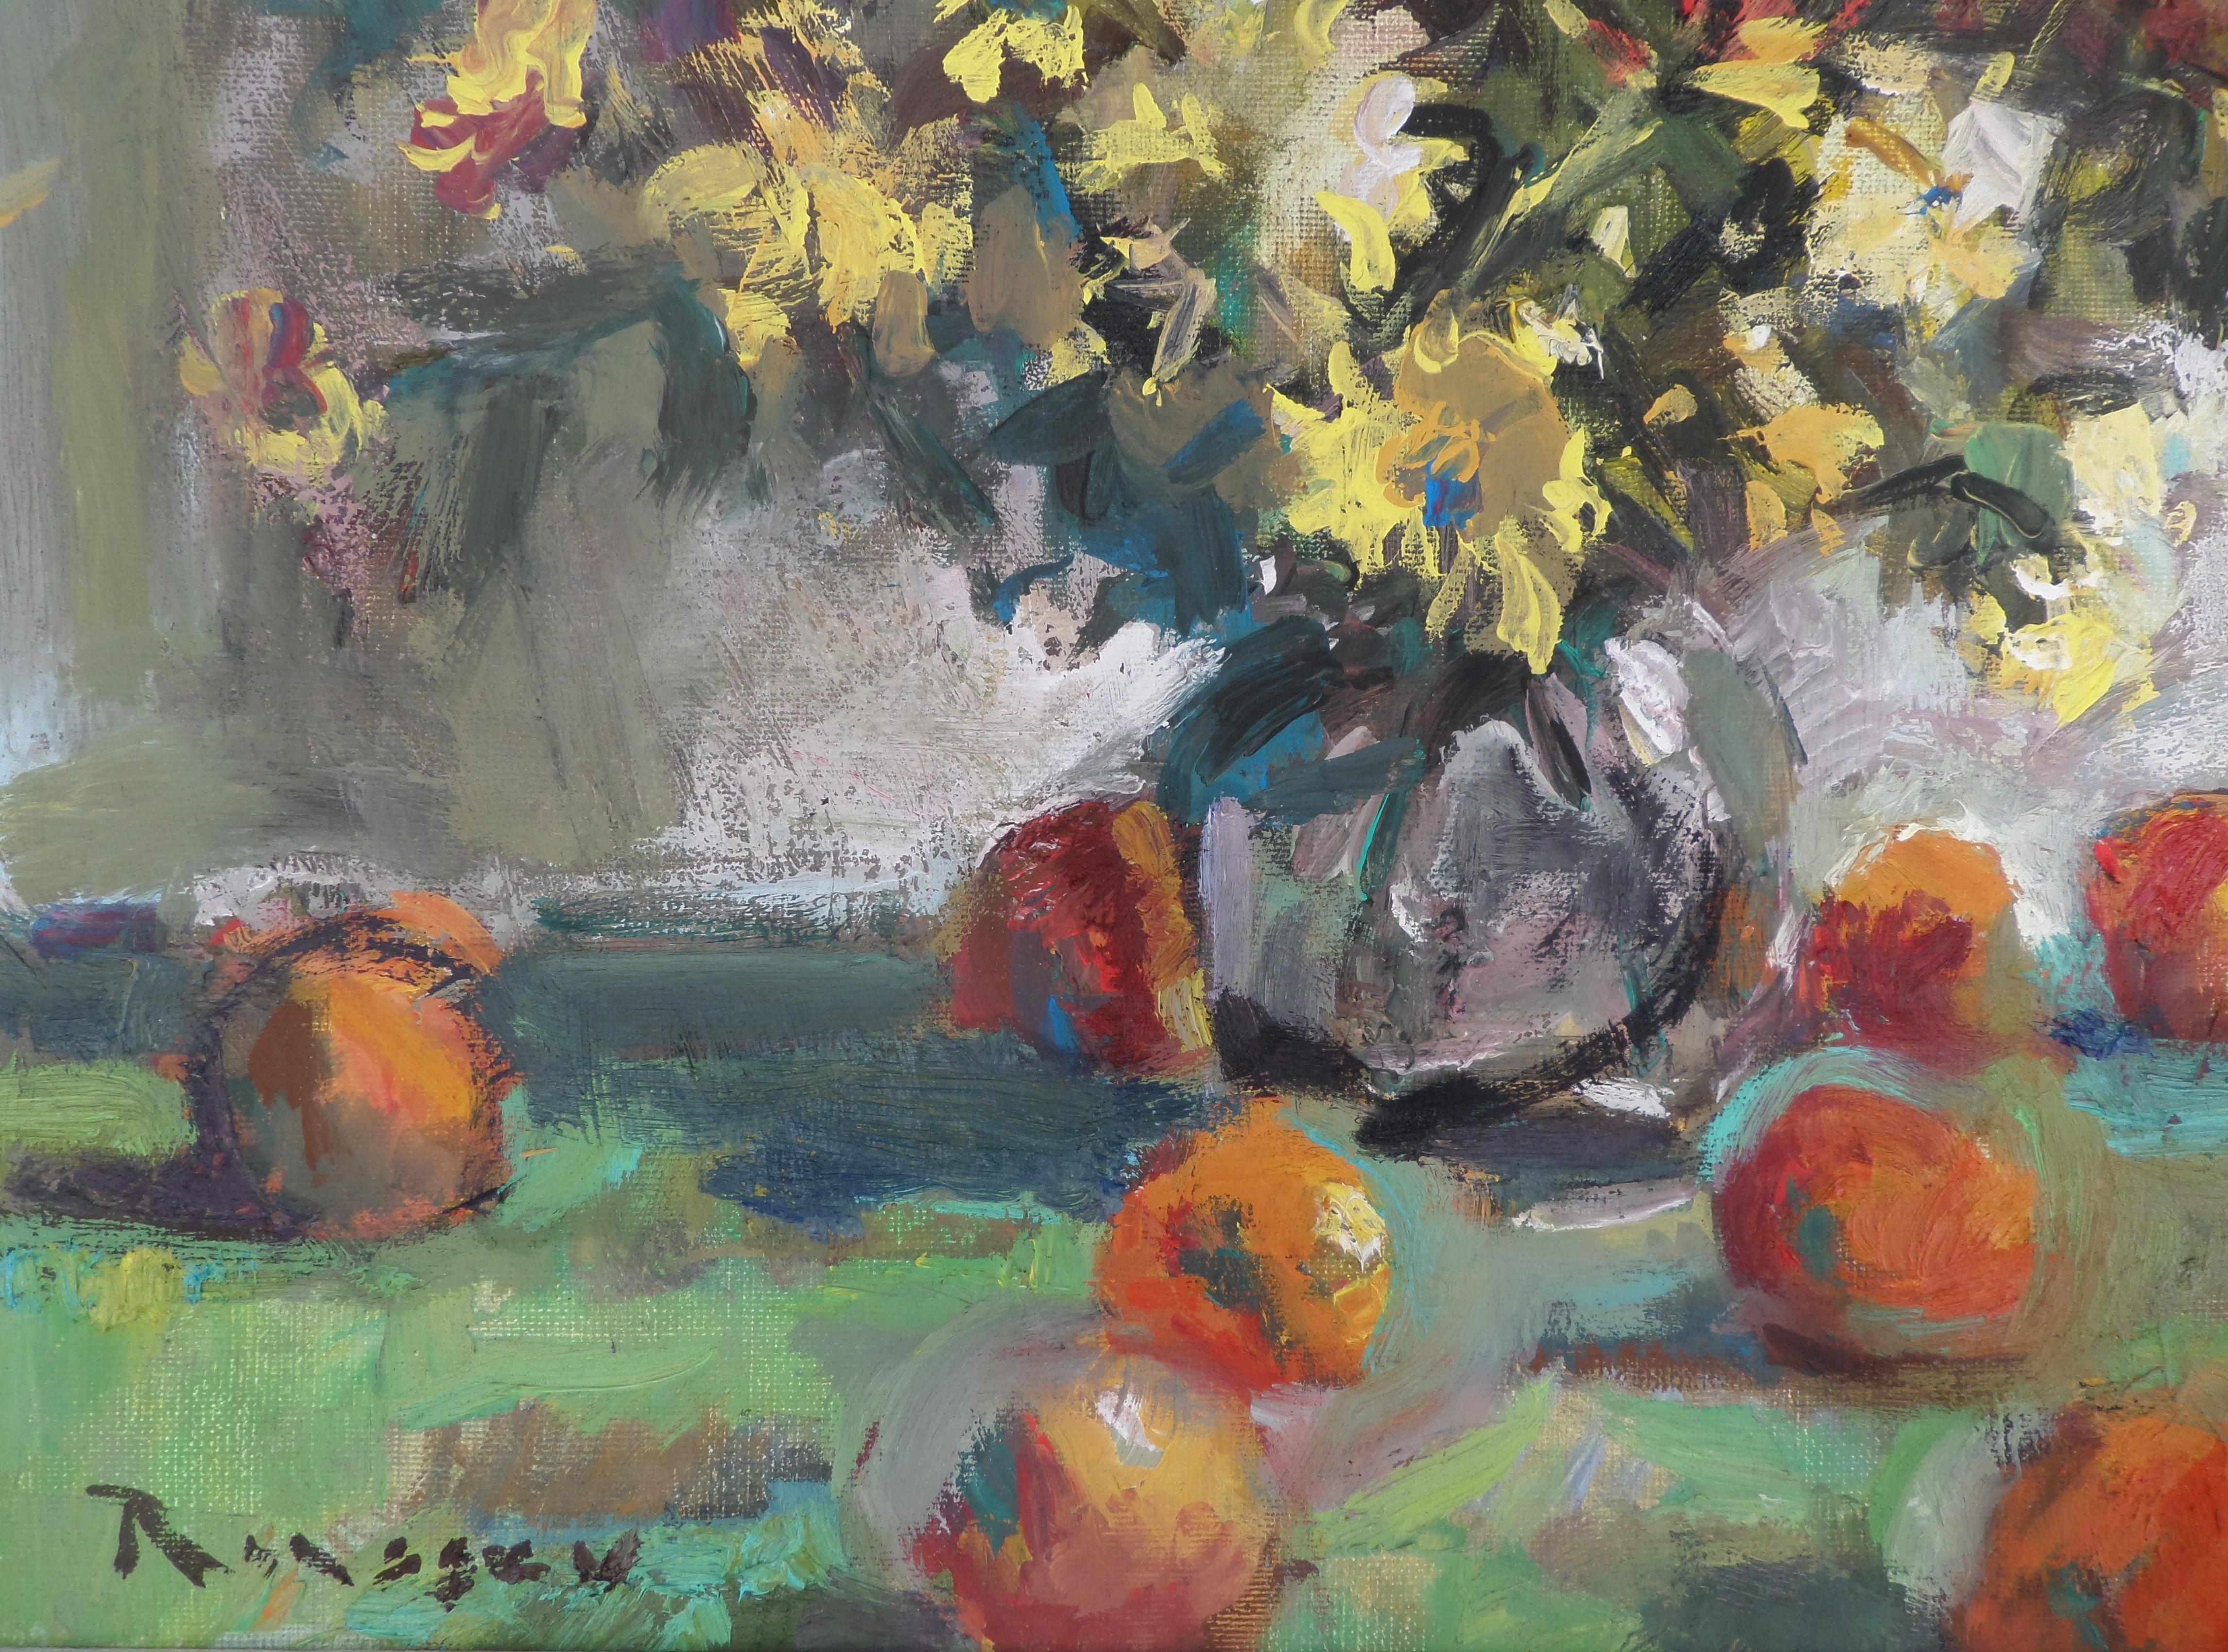 Flowers And Fruits - Still Life Oil painting Green Red White Yellow Brown Orange - Painting by Ivan Roussev